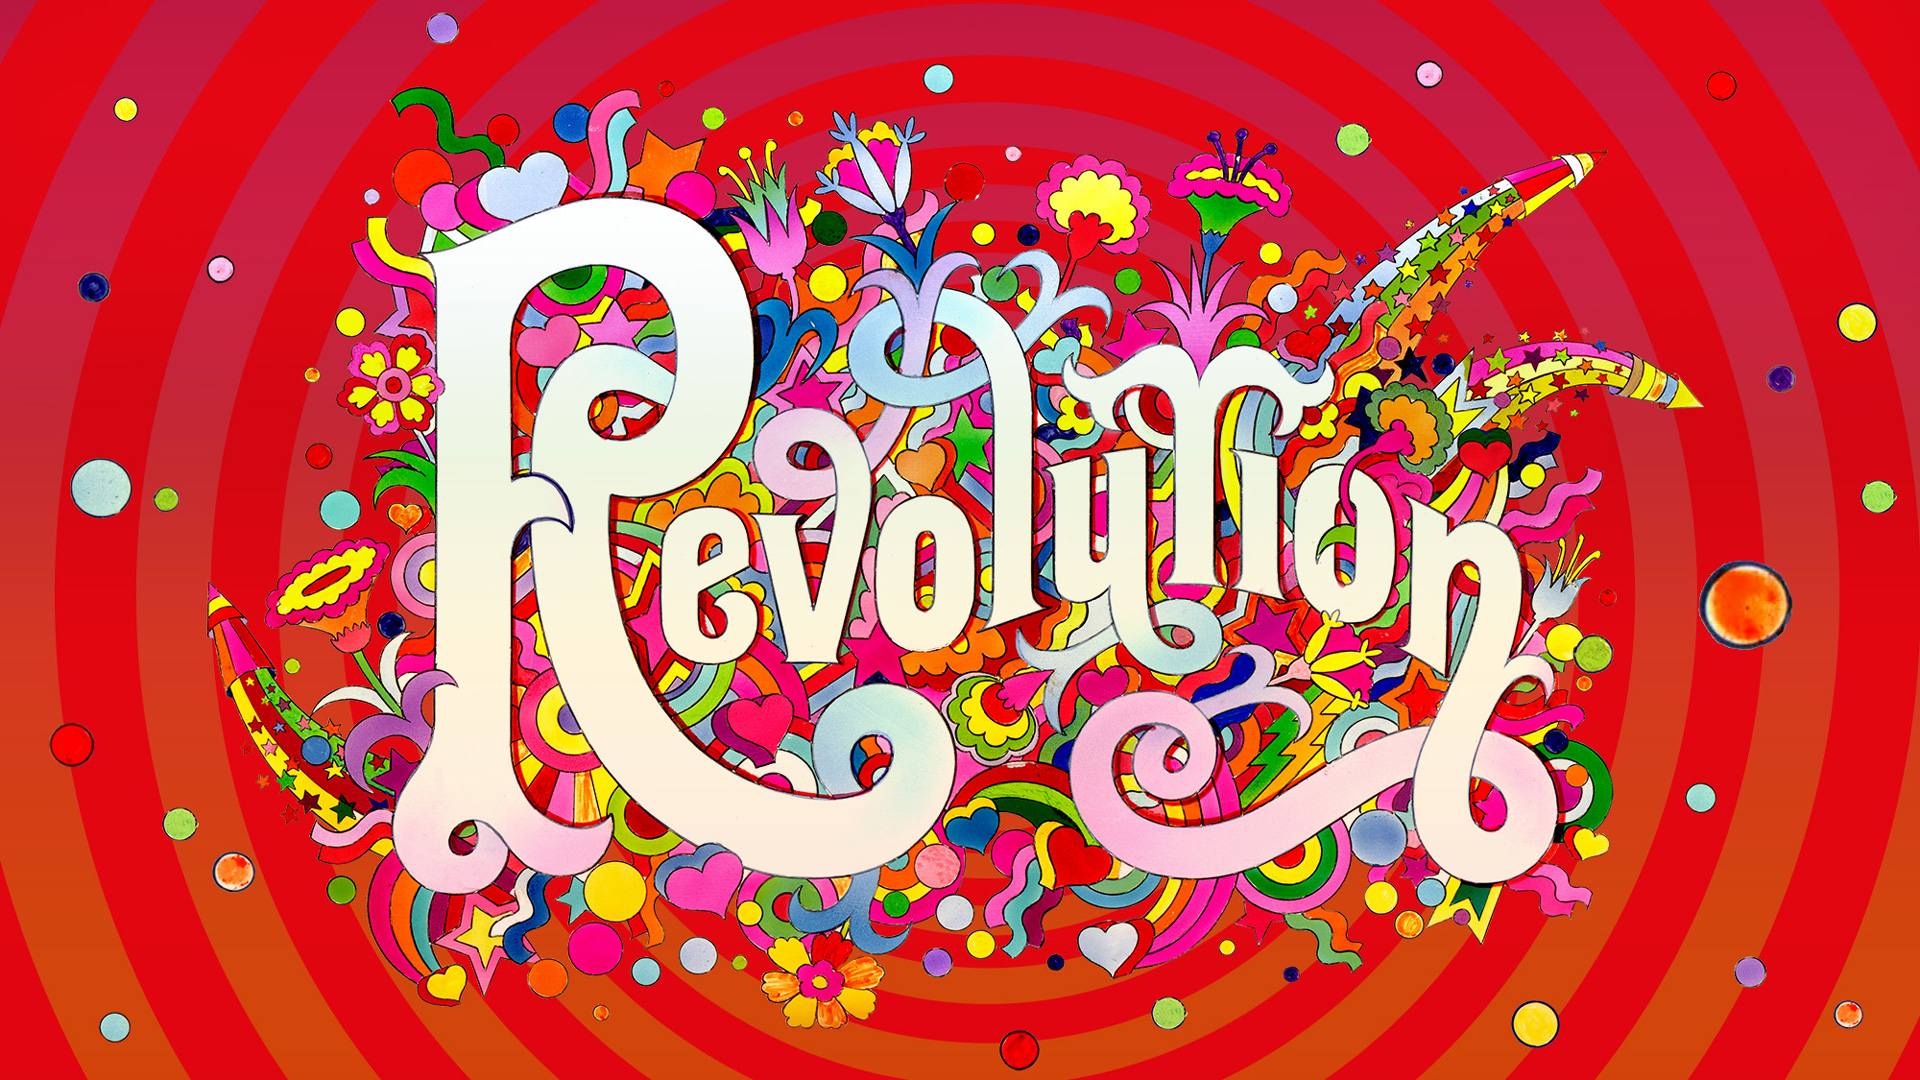 The V&A museum, Revolution exhibition, motion graphics design, london, 60's, sixties, records and rebels, roxanne silverwood, revolution